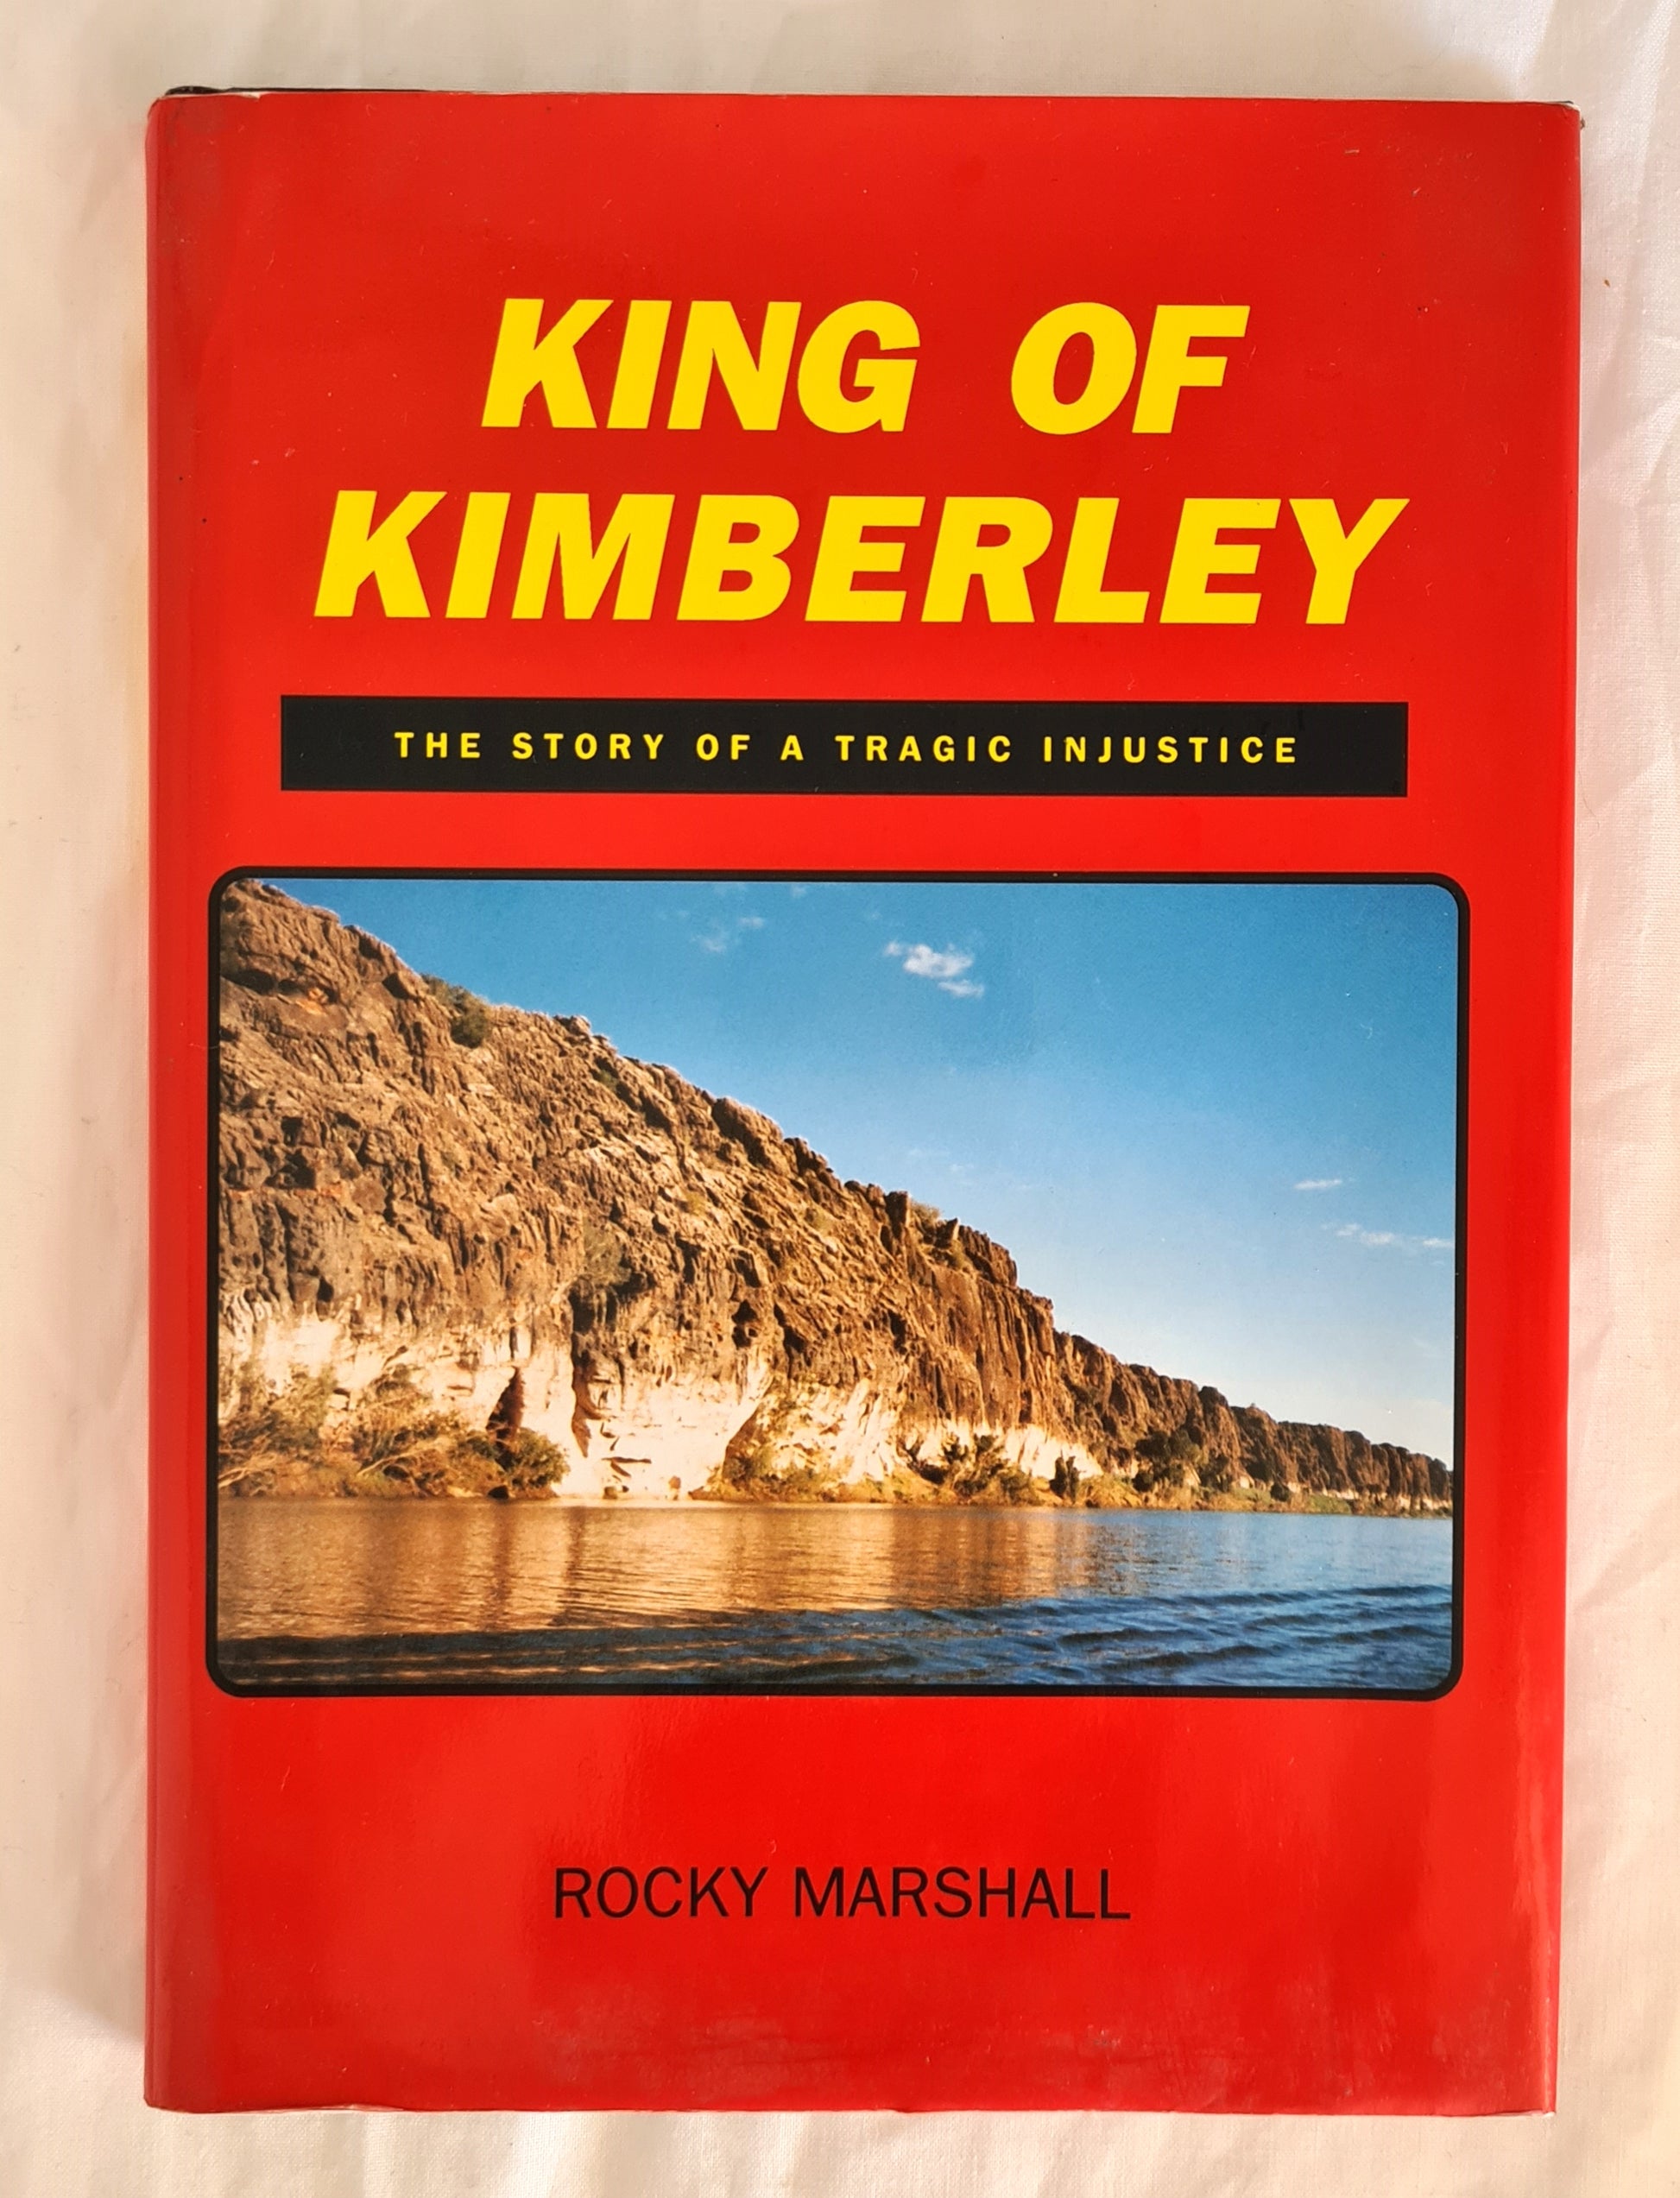 King of Kimberley  The Story of a Tragic Injustice  by Rocky Marshall